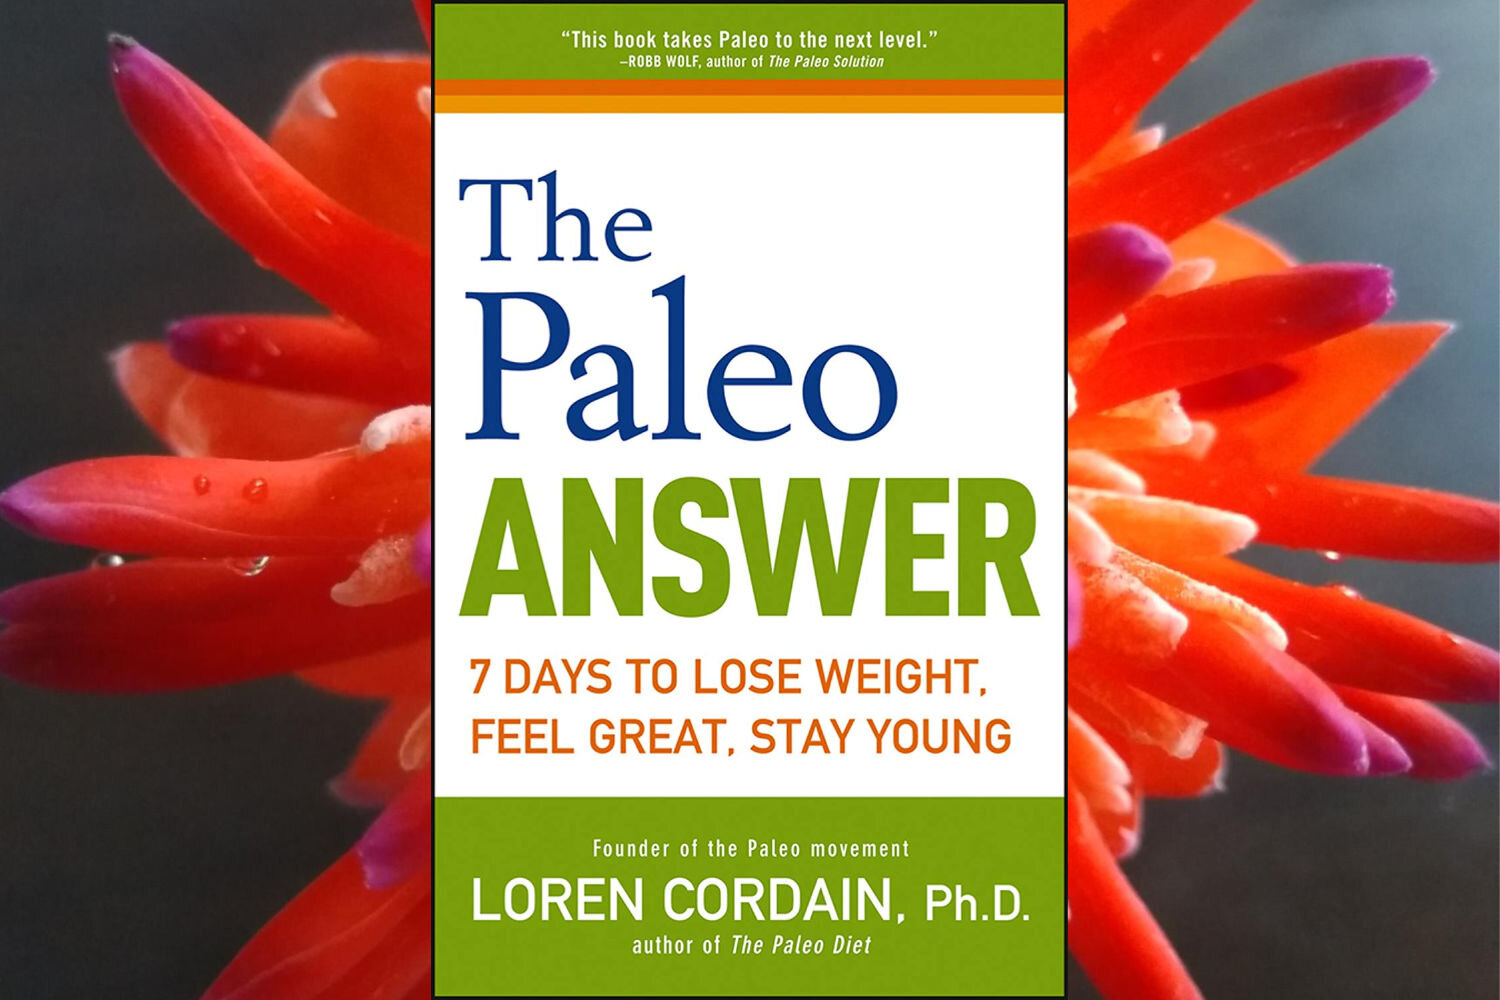 The Paleo Diet is Debunked, But What About Paleo Sitting? - QOR360